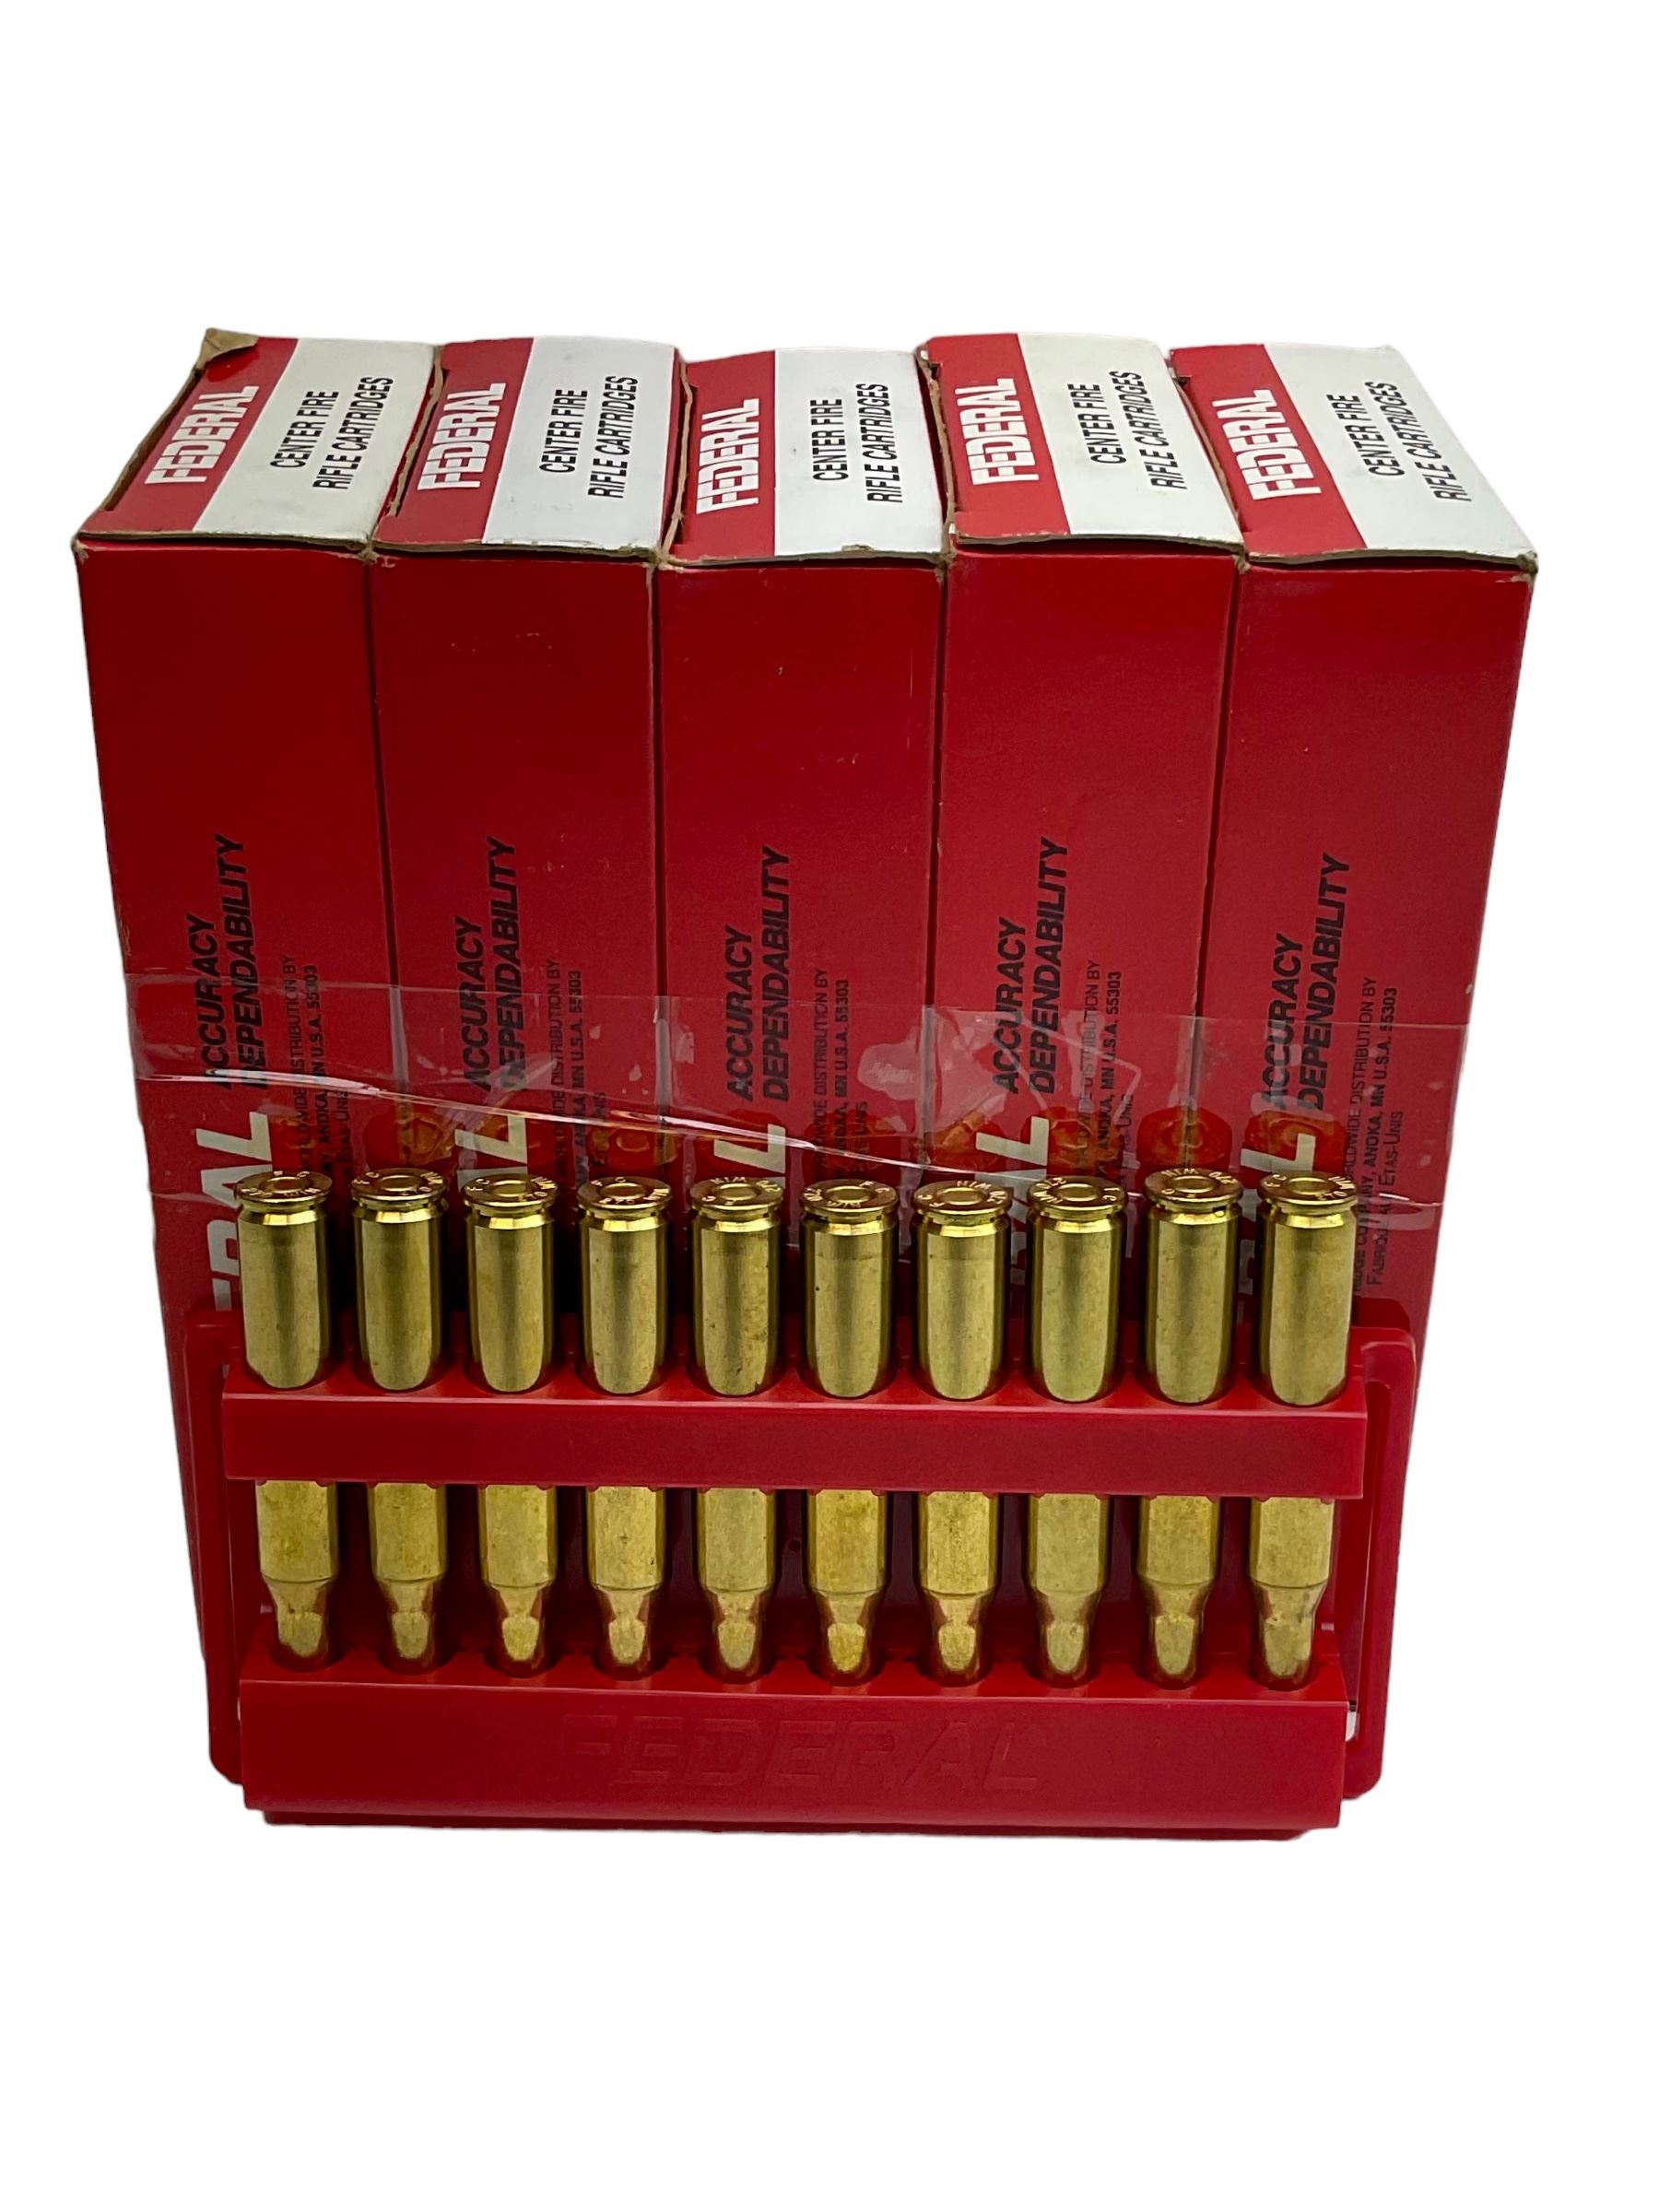 SECTION 1 FIREARMS CERTIFICATE REQUIRED - One hundred rounds of Federal 207 130 GR Hi Sock Soft Poin